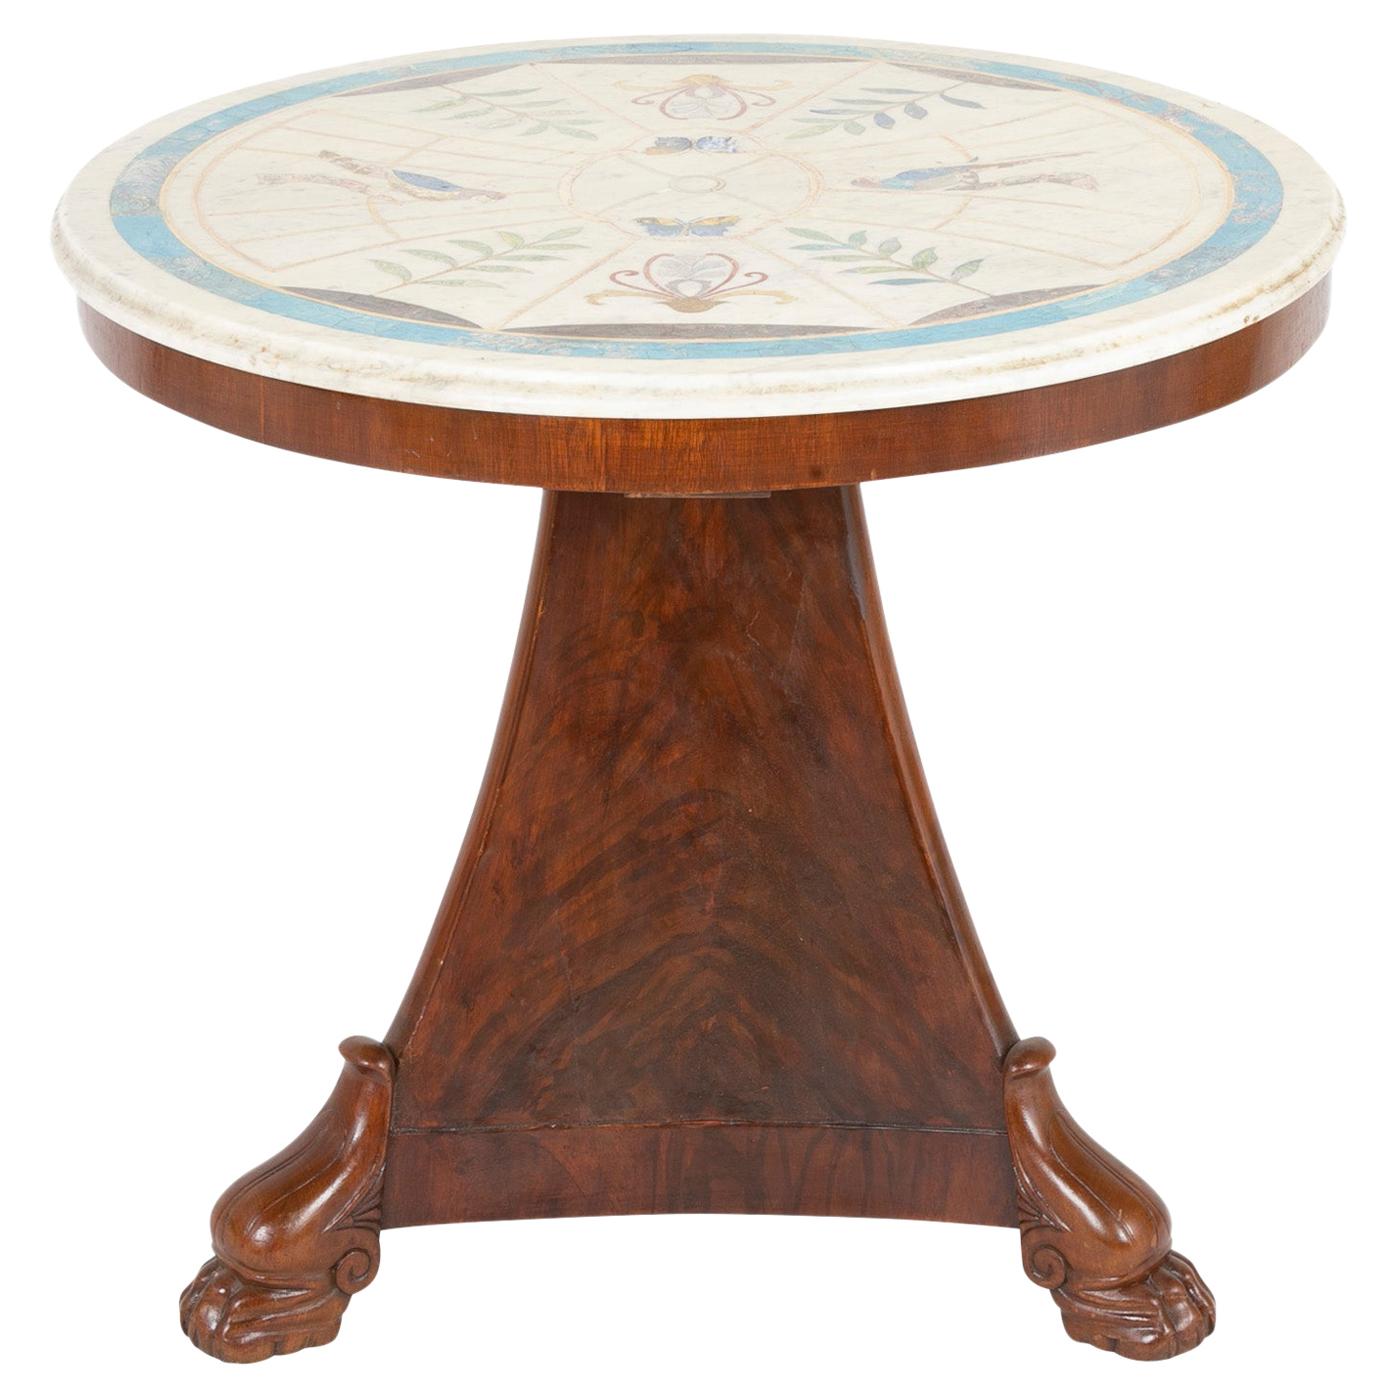 French Empire Mahogany Table with Rare Scagliola Marble Top